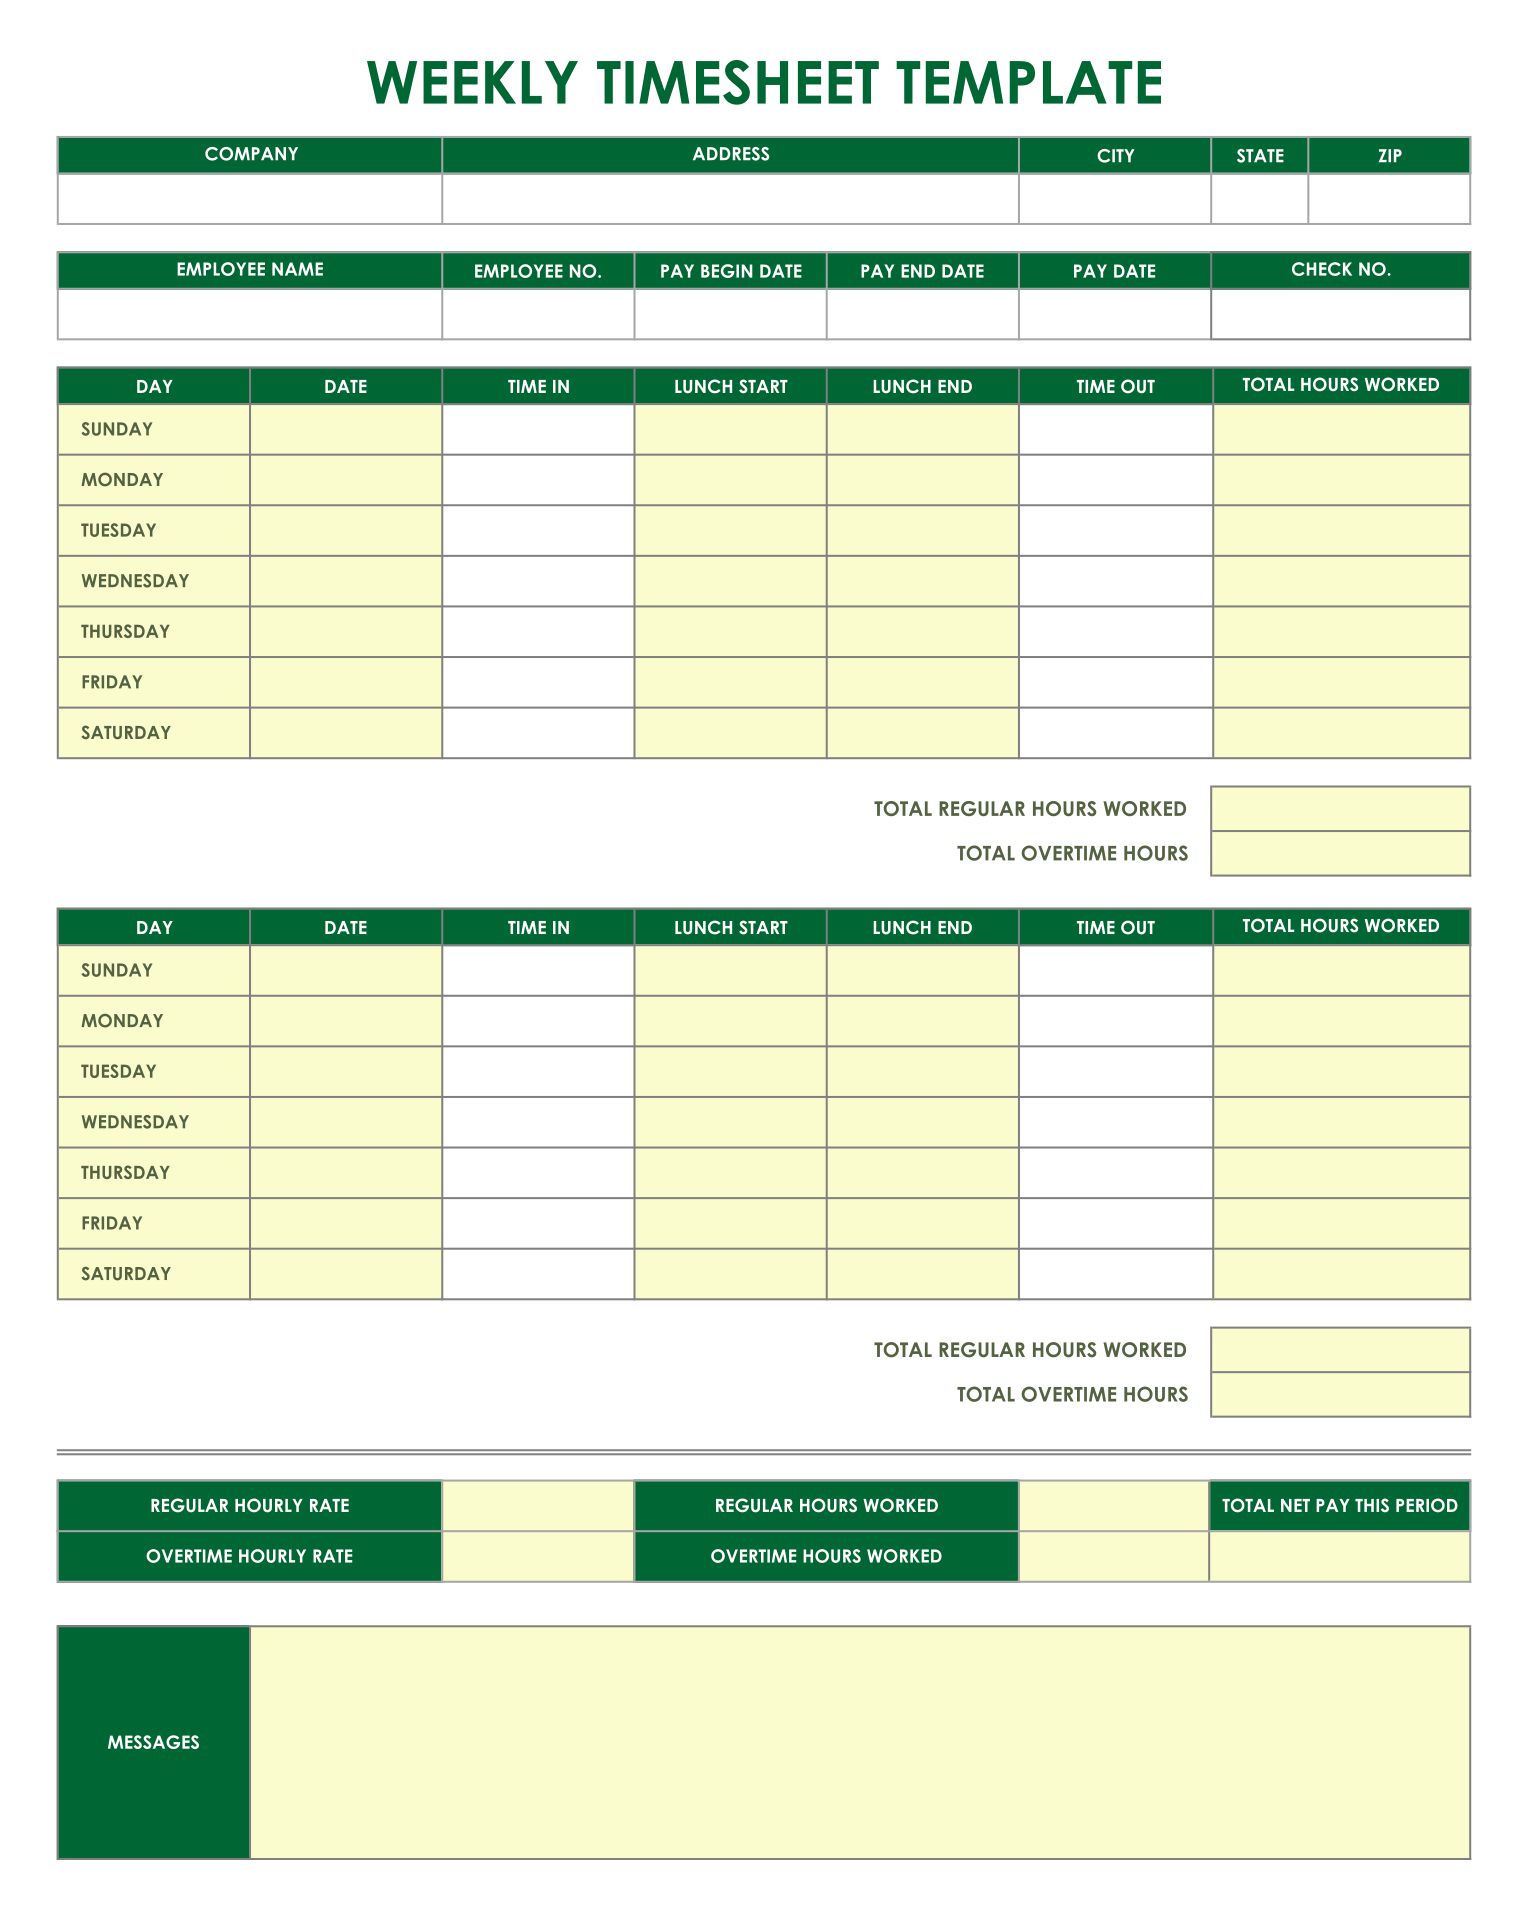 Employee Time Sheet Form Printable Printable Forms Free Online